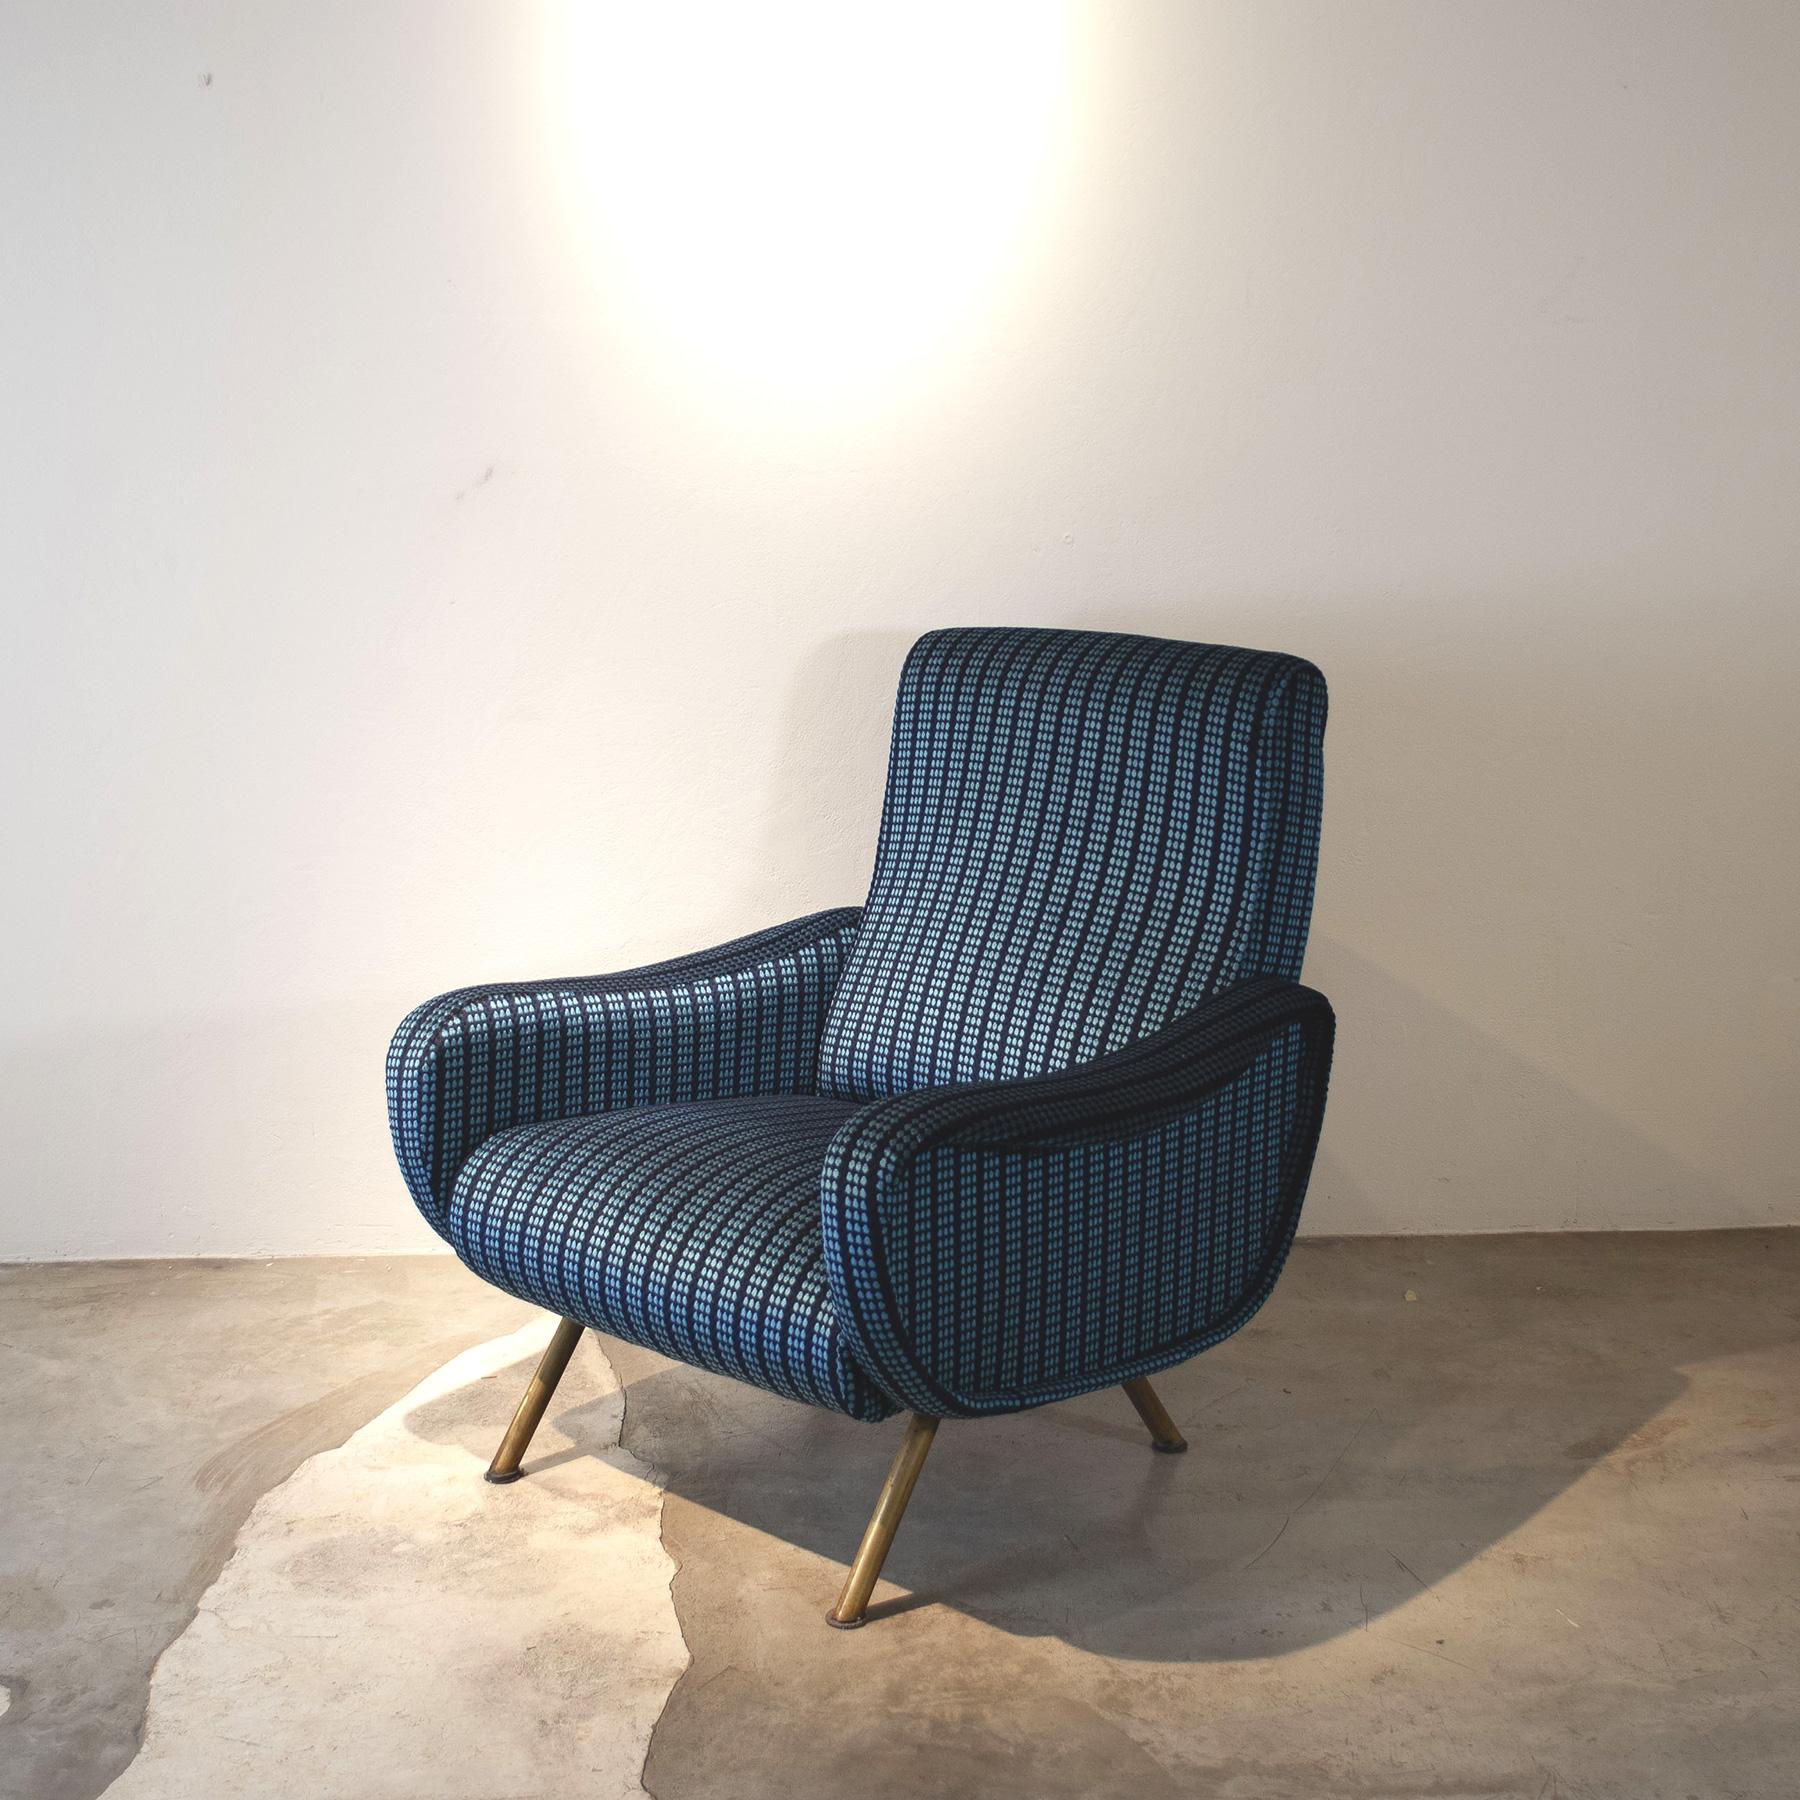 A timeless must still in production this vintage armchair named Lady by master designer Marco Zanuso for Arflex 1960s production.

Marco Zanuso (Milan, May 14, 1916 - Milan, July 11, 2001) was an Italian architect, designer and urban planner.

He is